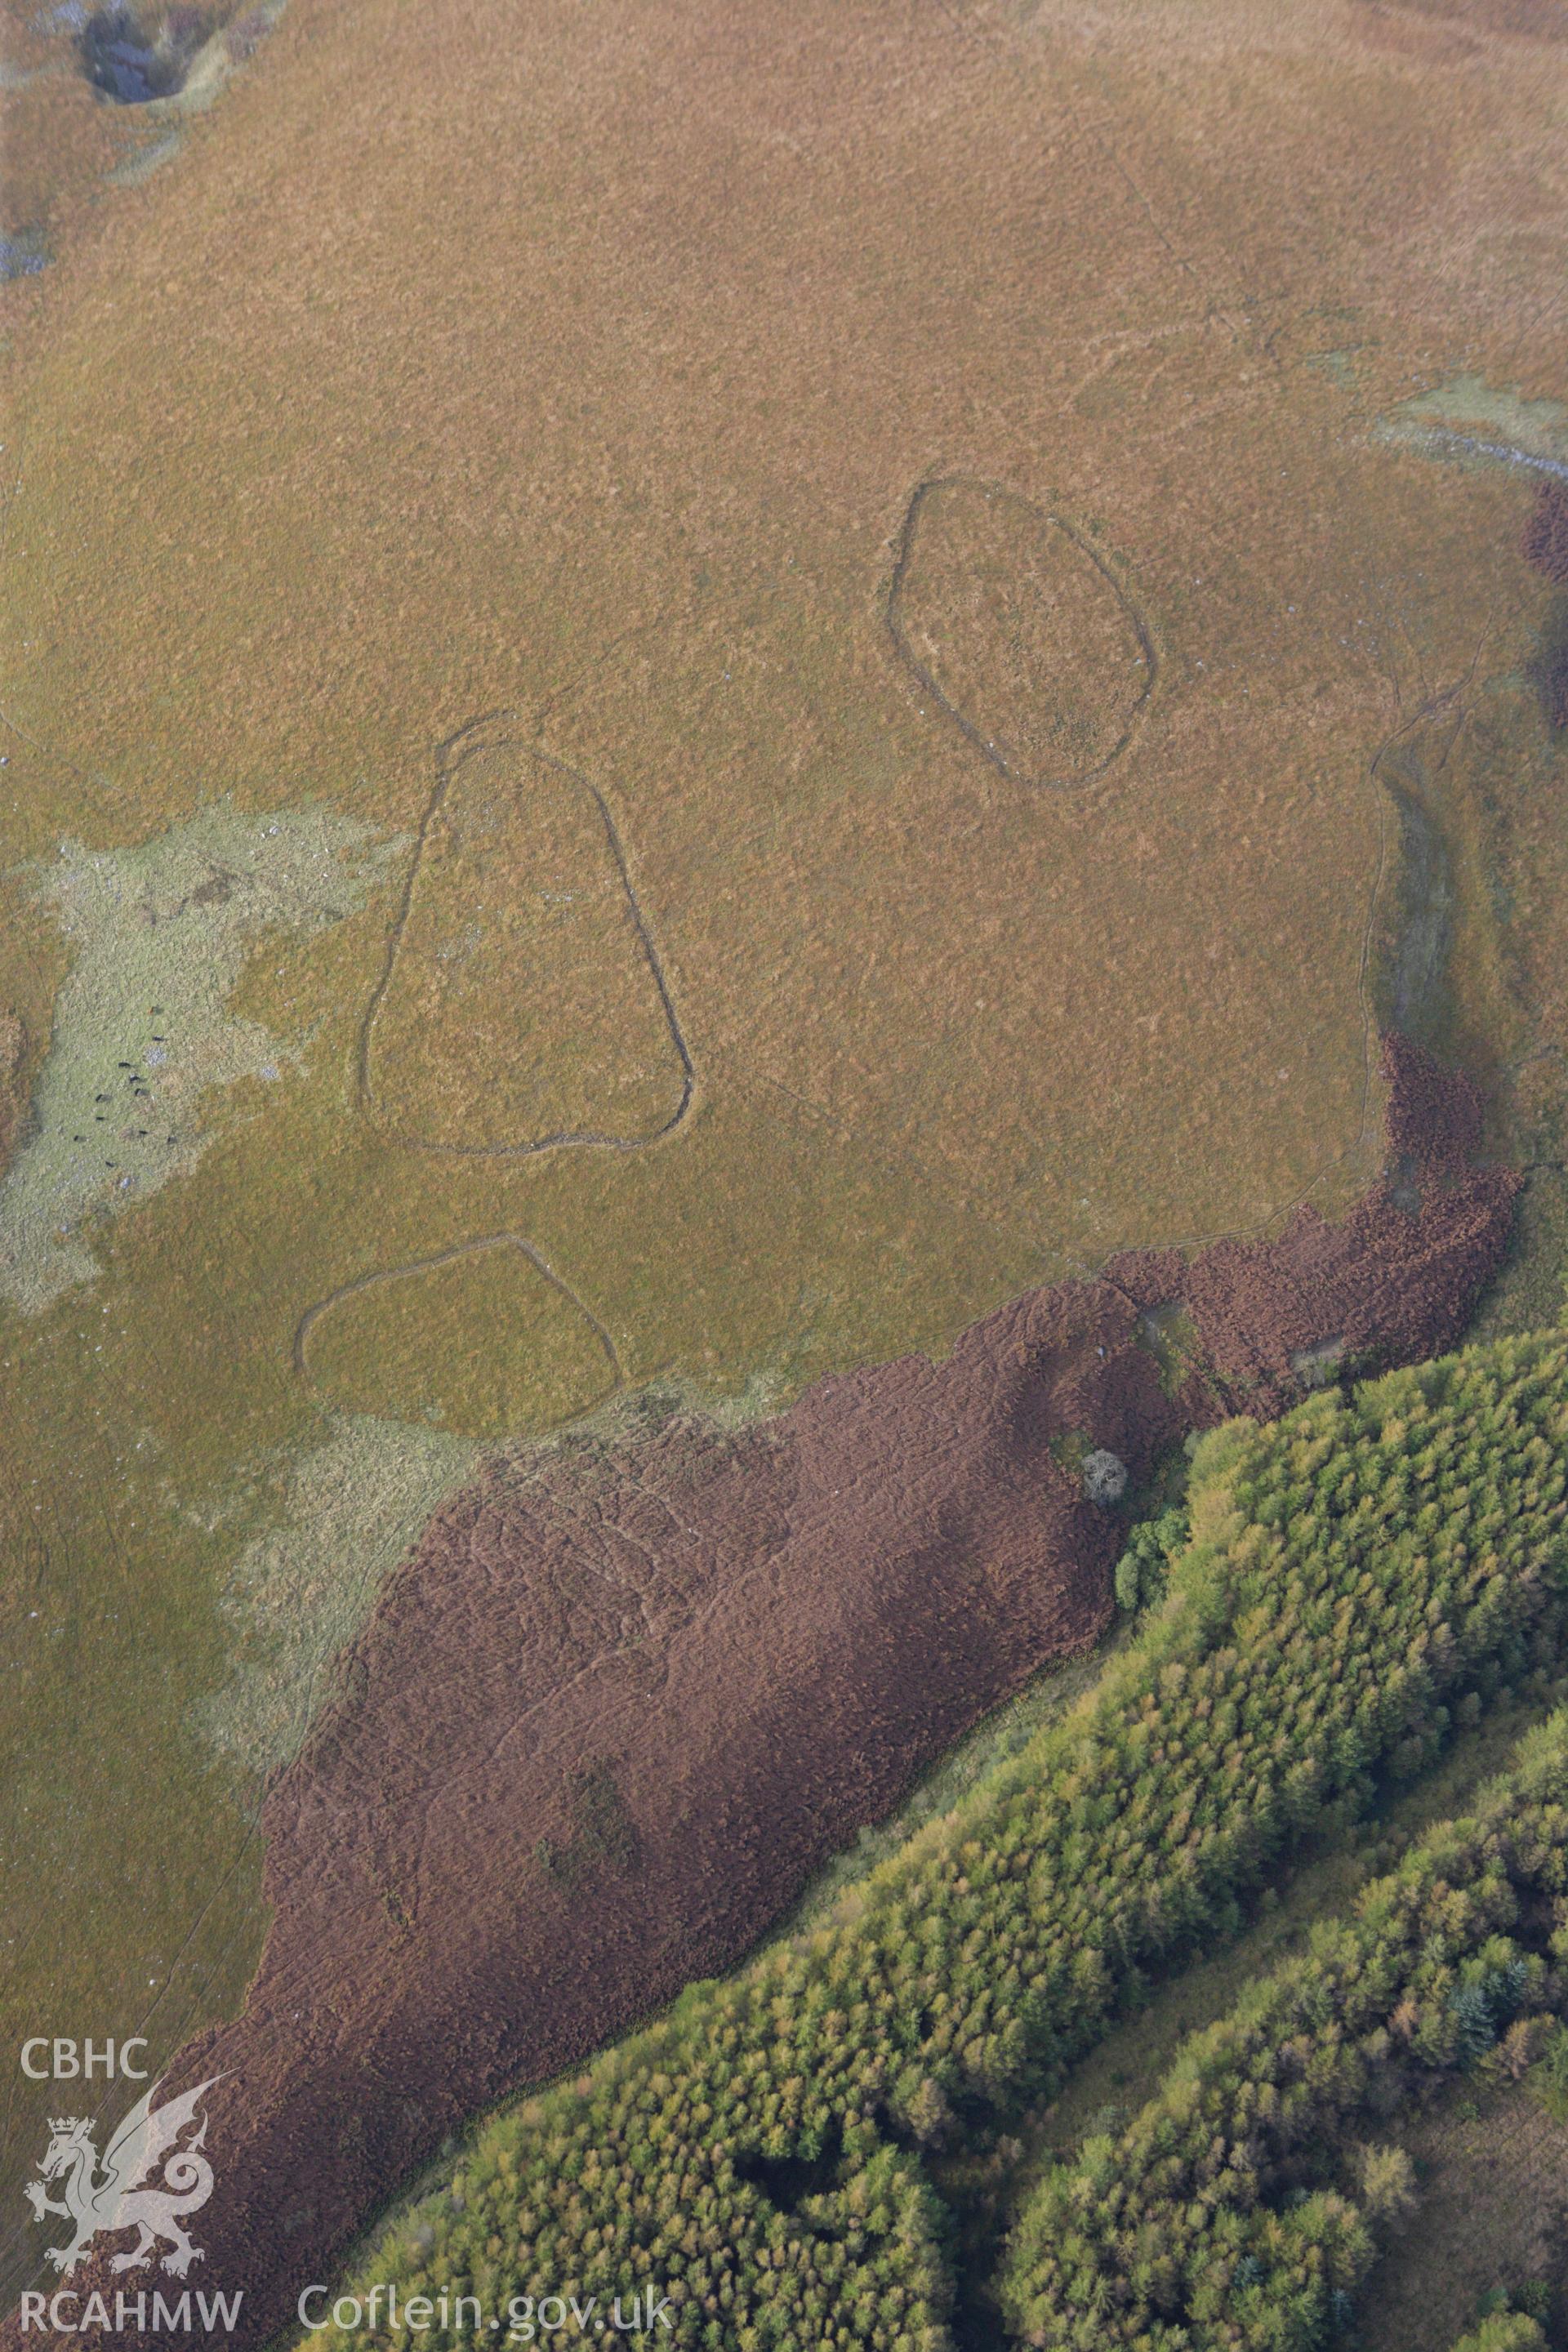 RCAHMW colour oblique aerial photograph of enclosures. Taken on 14 October 2009 by Toby Driver